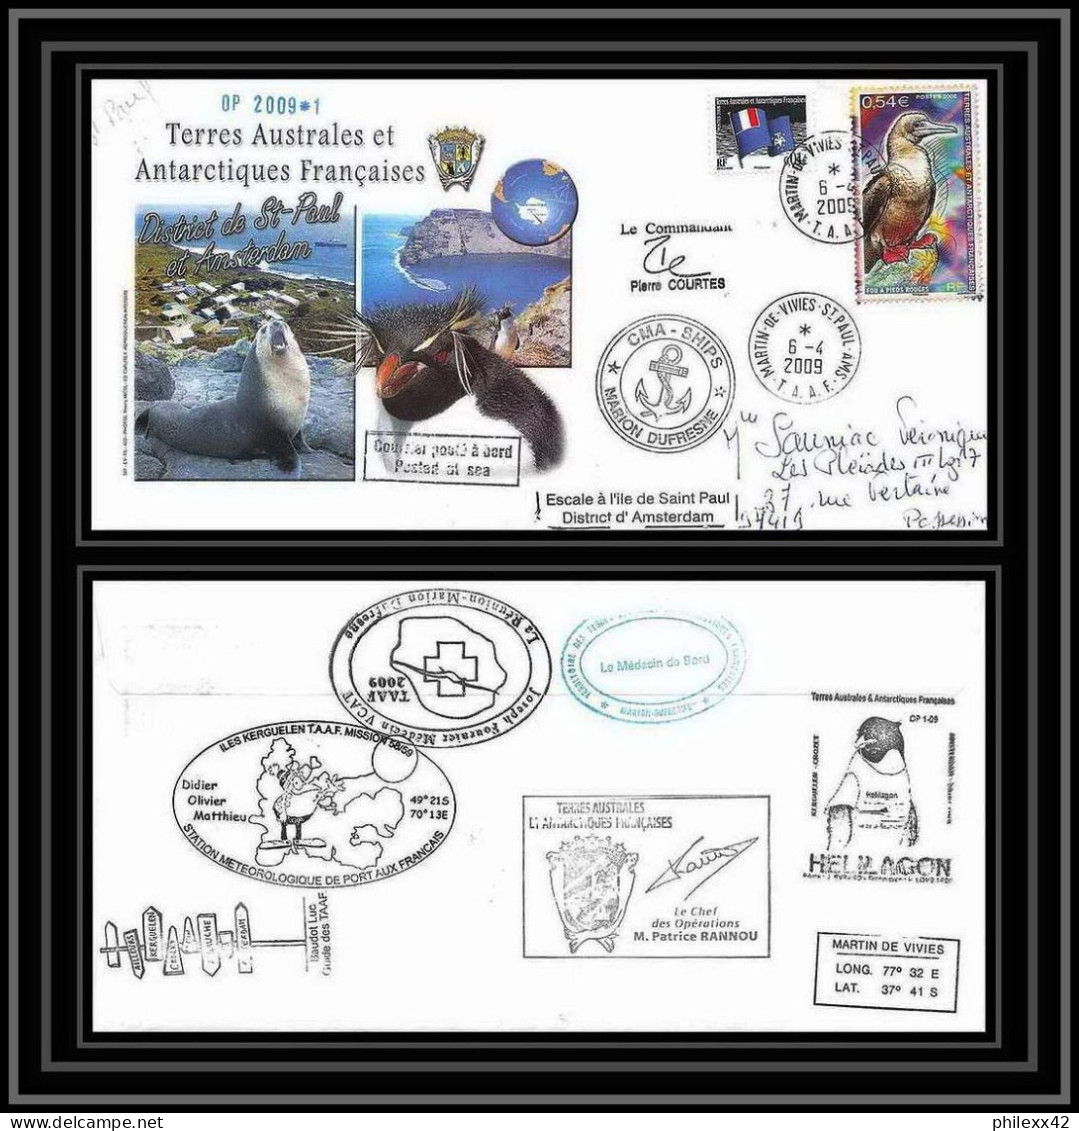 2904 Dufresne 2 Signé Signed OP 2009/1 St Paul 6/4/2009 N°515 Helilagon Terres Australes (taaf) Lettre Cover Fou Bird - Helikopters